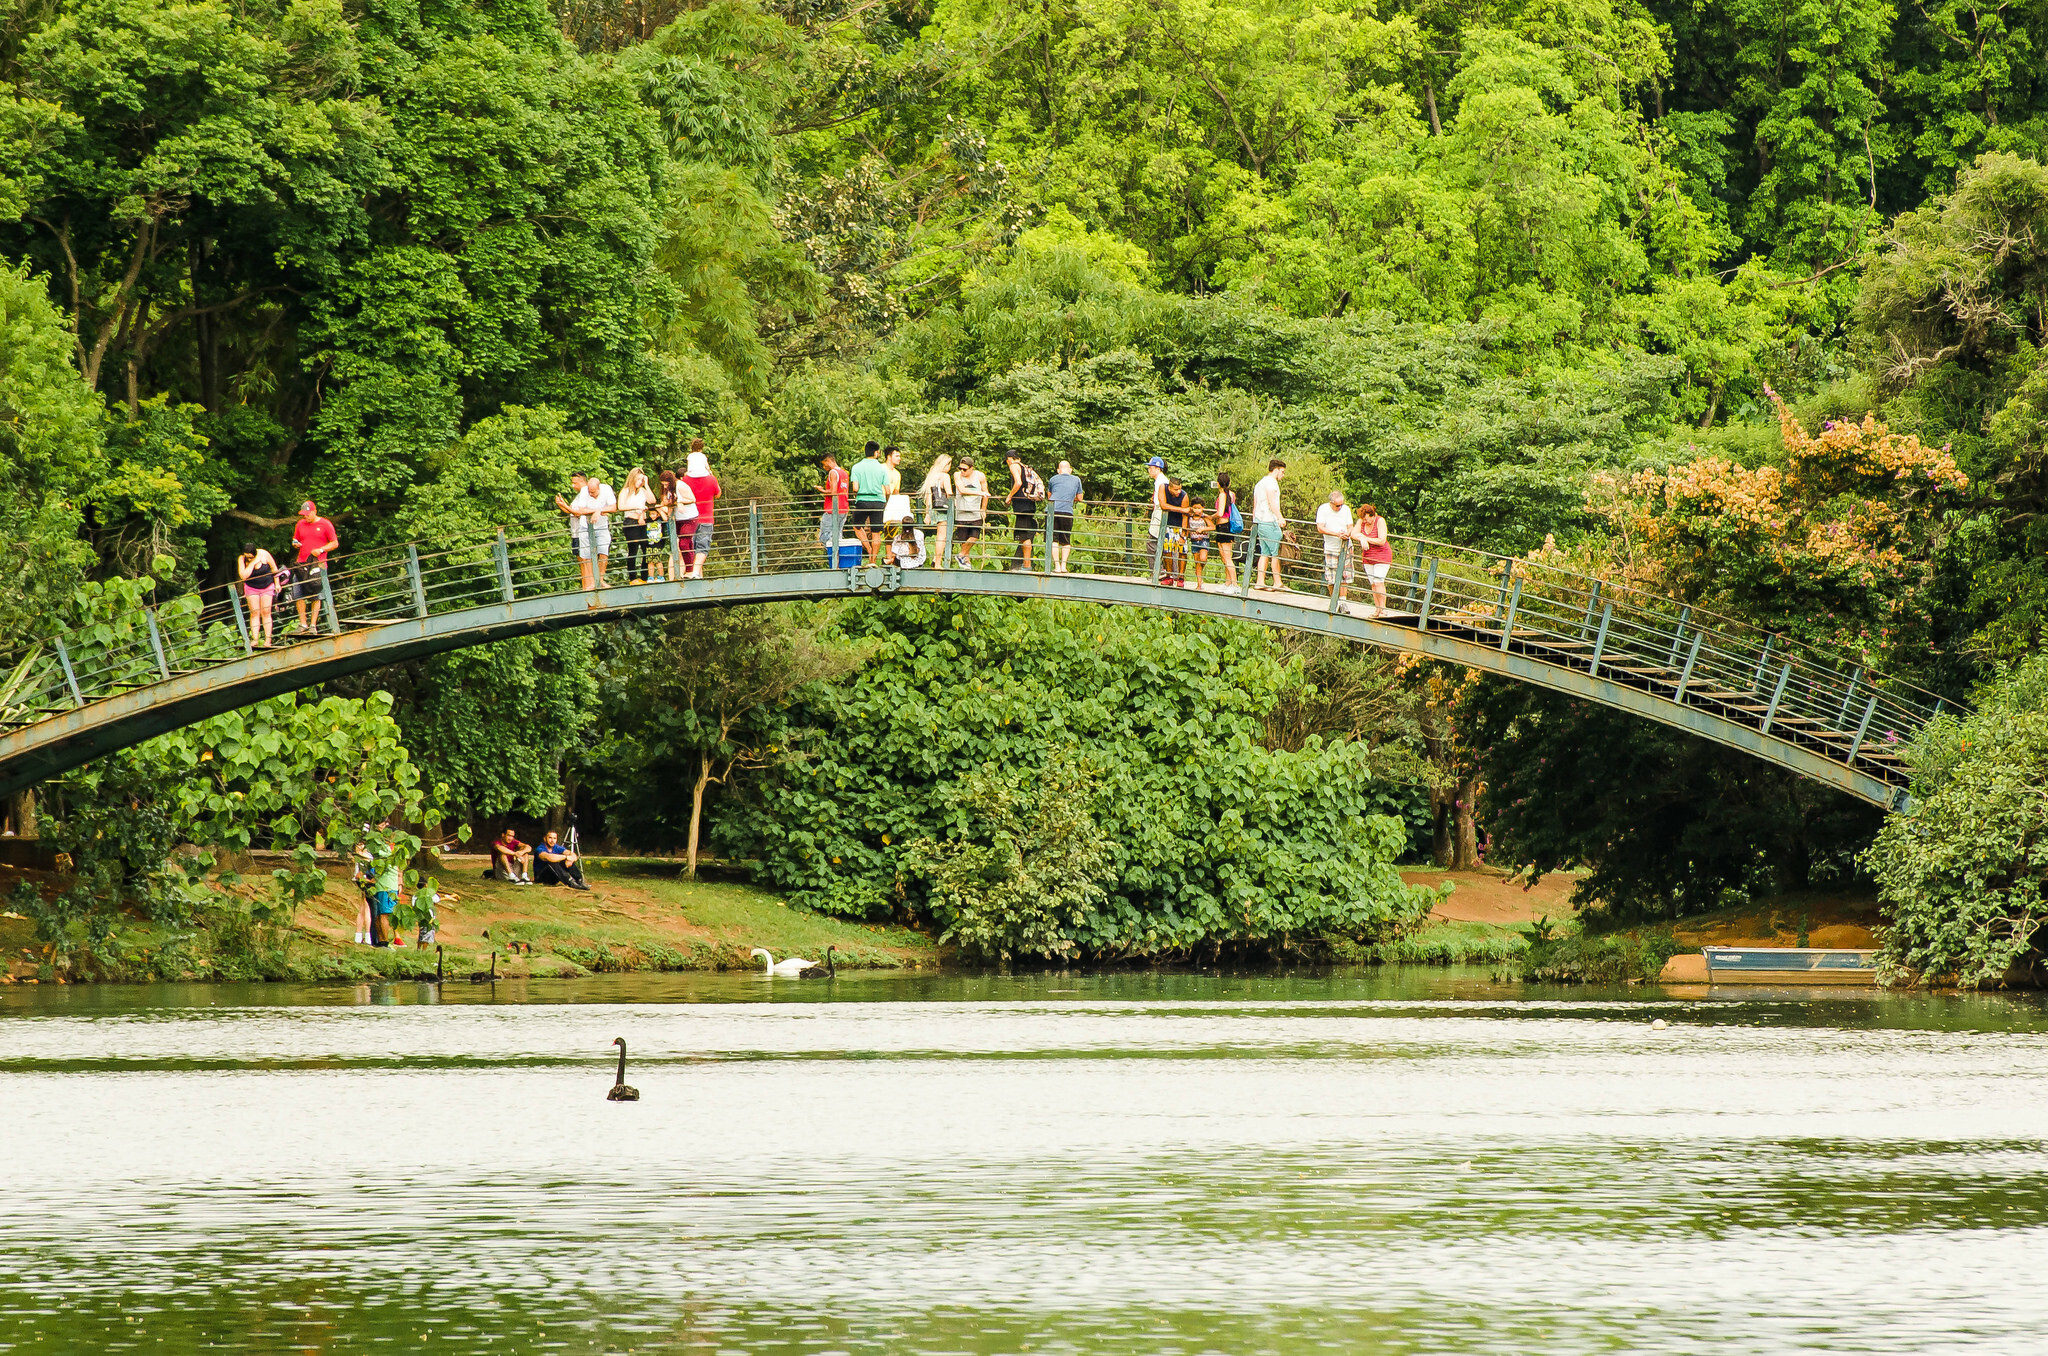 The most 7 fun things to do in Sao Paulo - urtrips